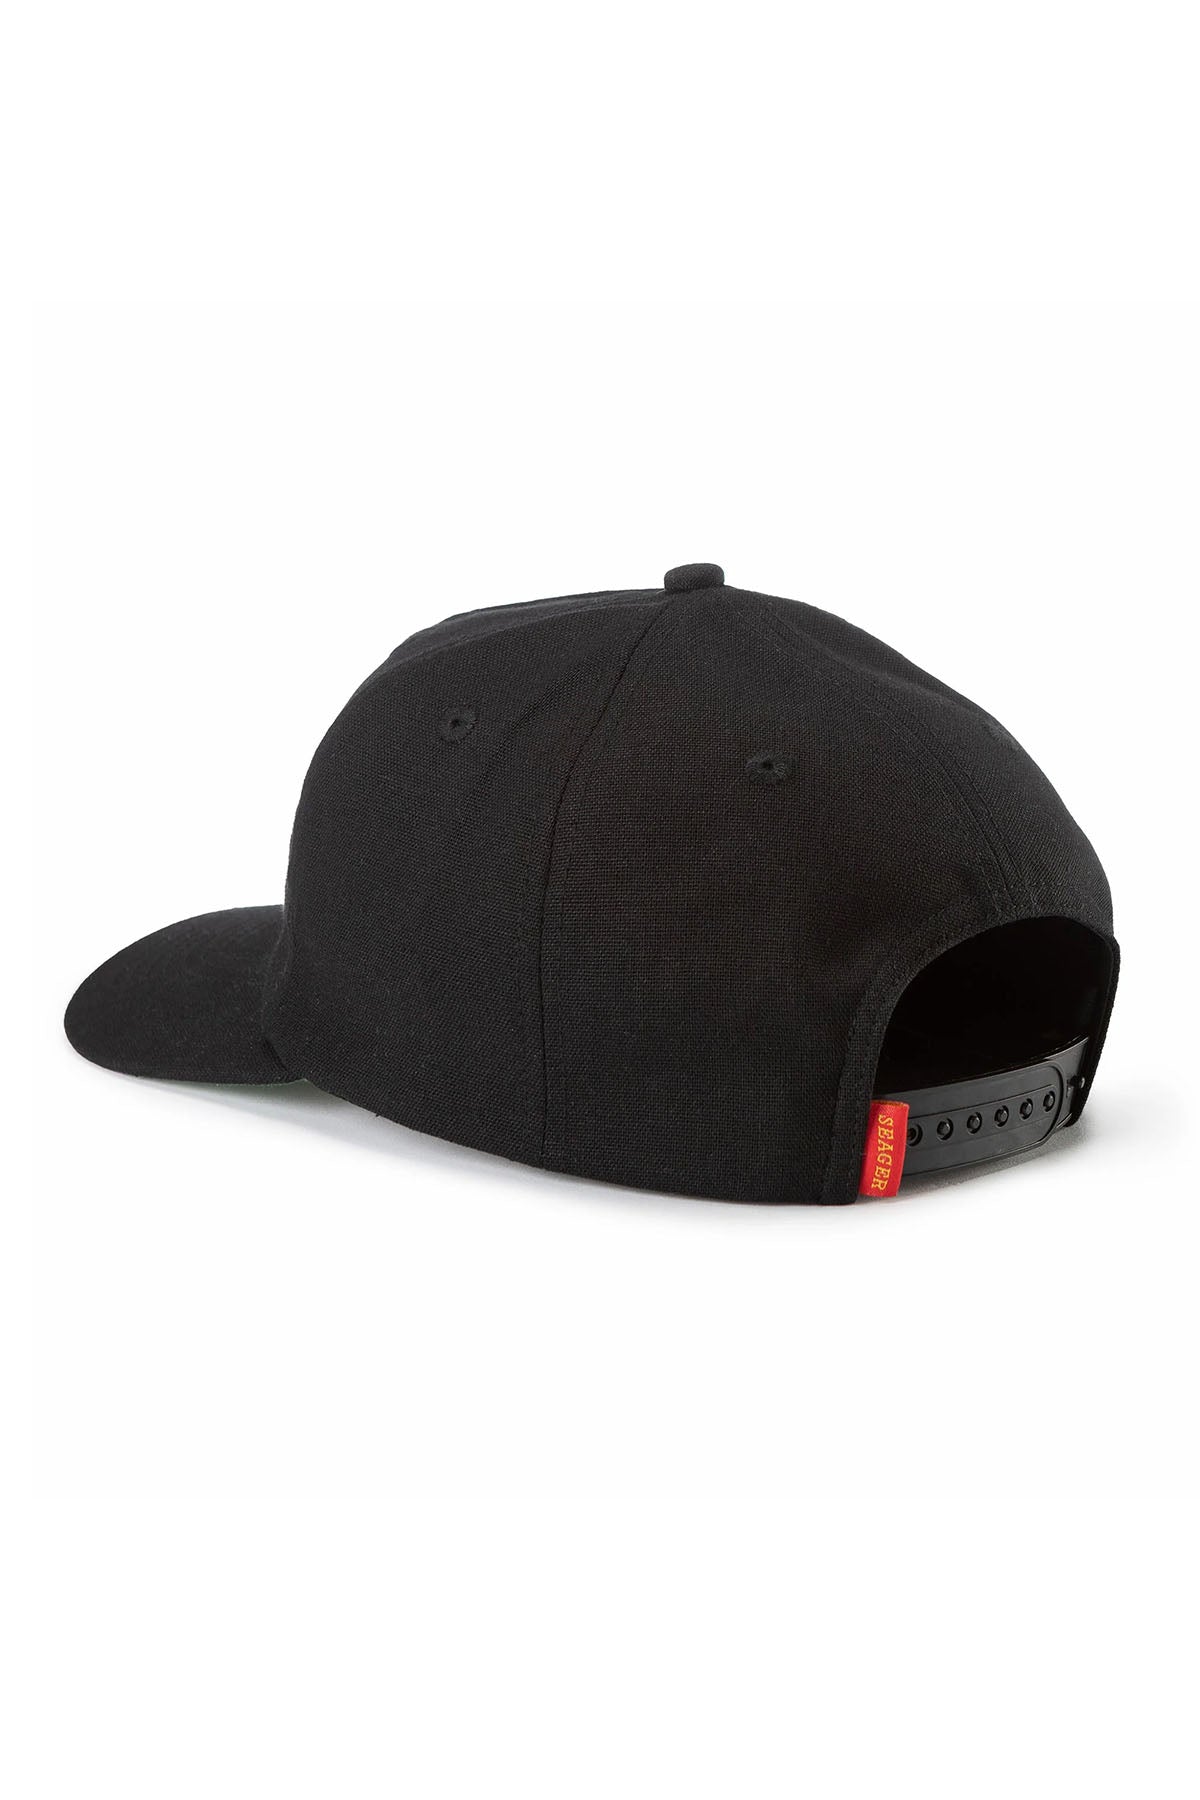 Seager - Coors Brand Snapback - Black - Back